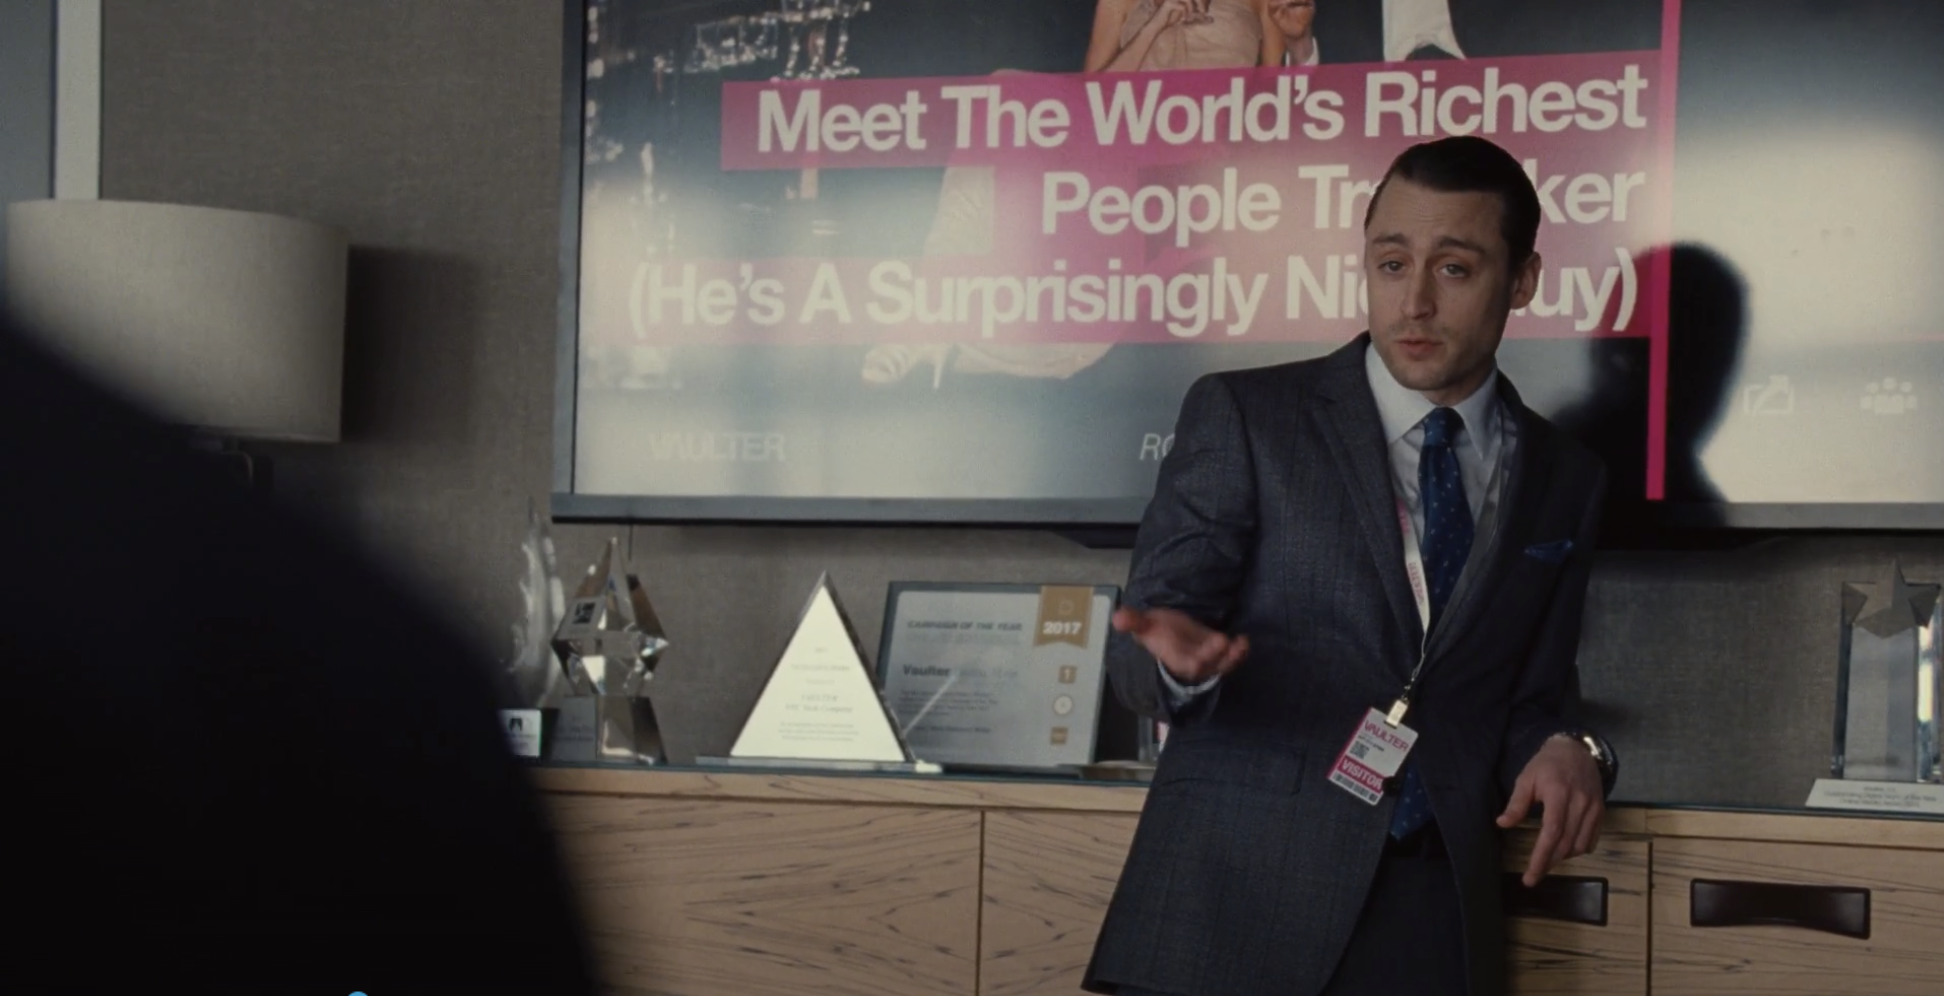 Vaulter From Succession Is Probably VICE Right VICE